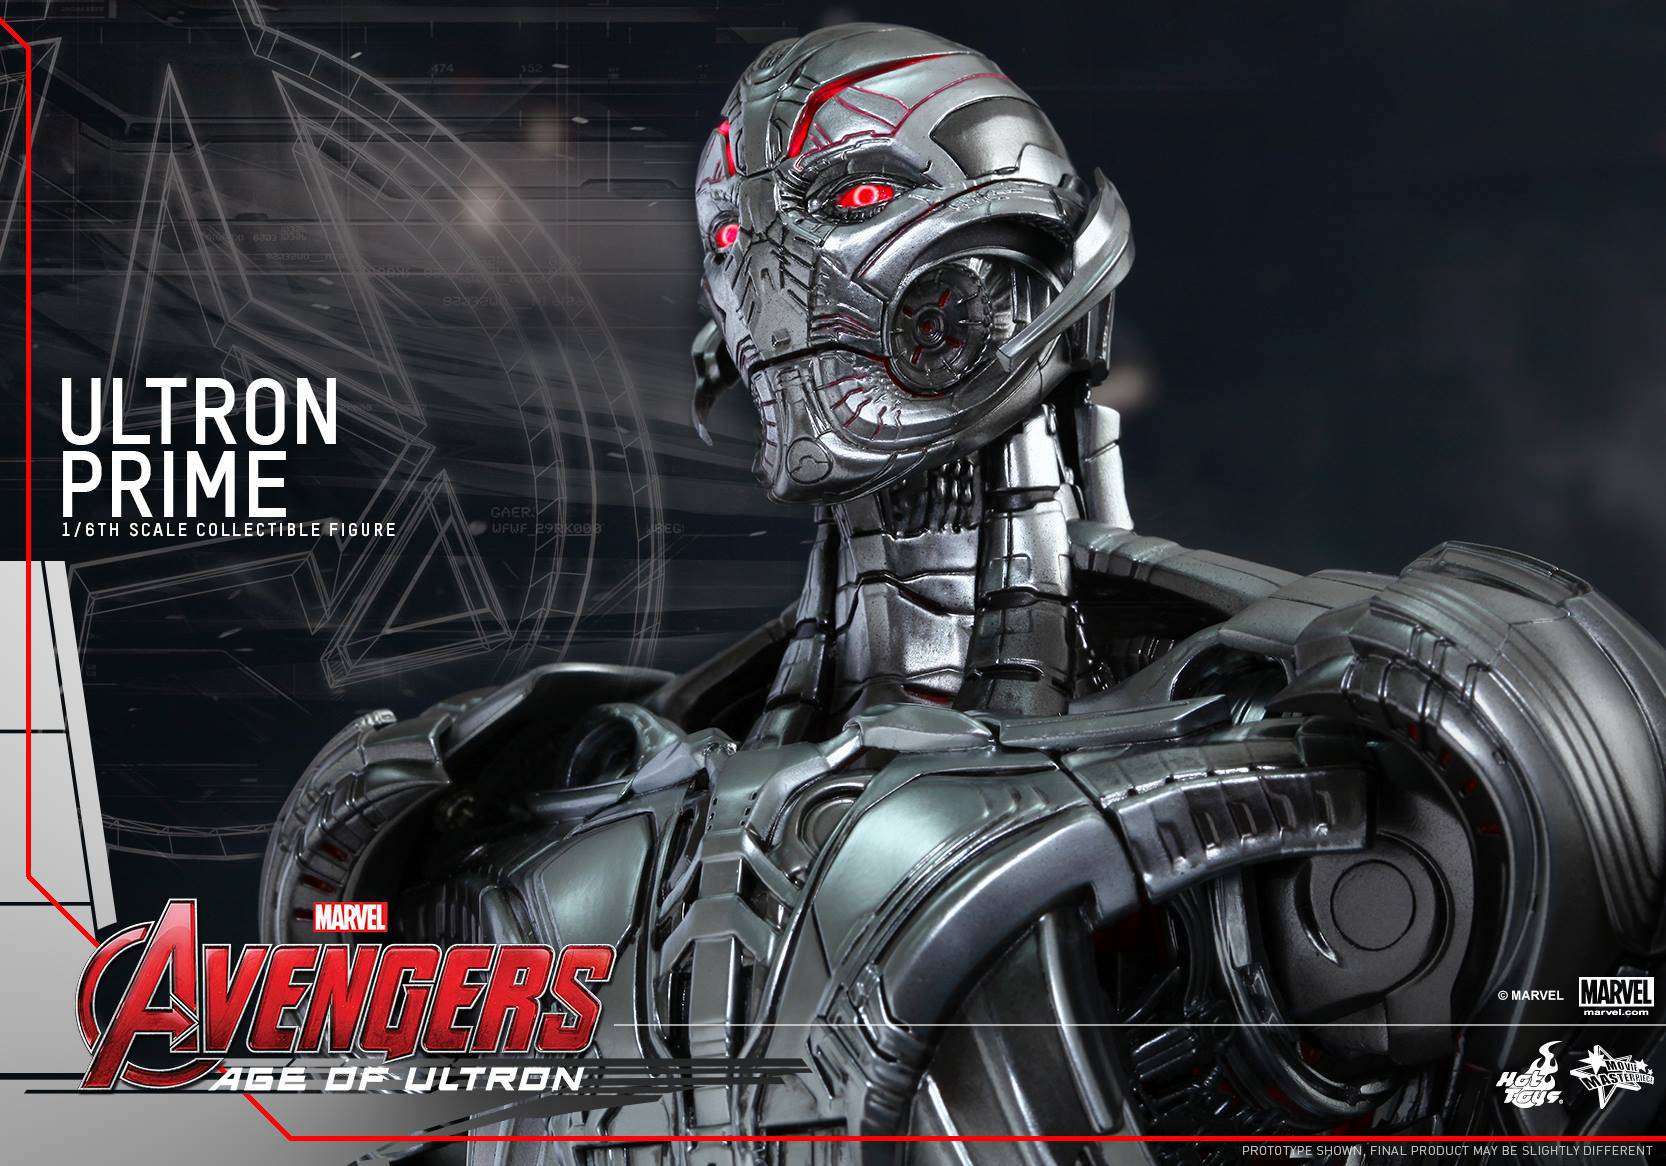 ultron, movie, avengers: age of ultron, the avengers